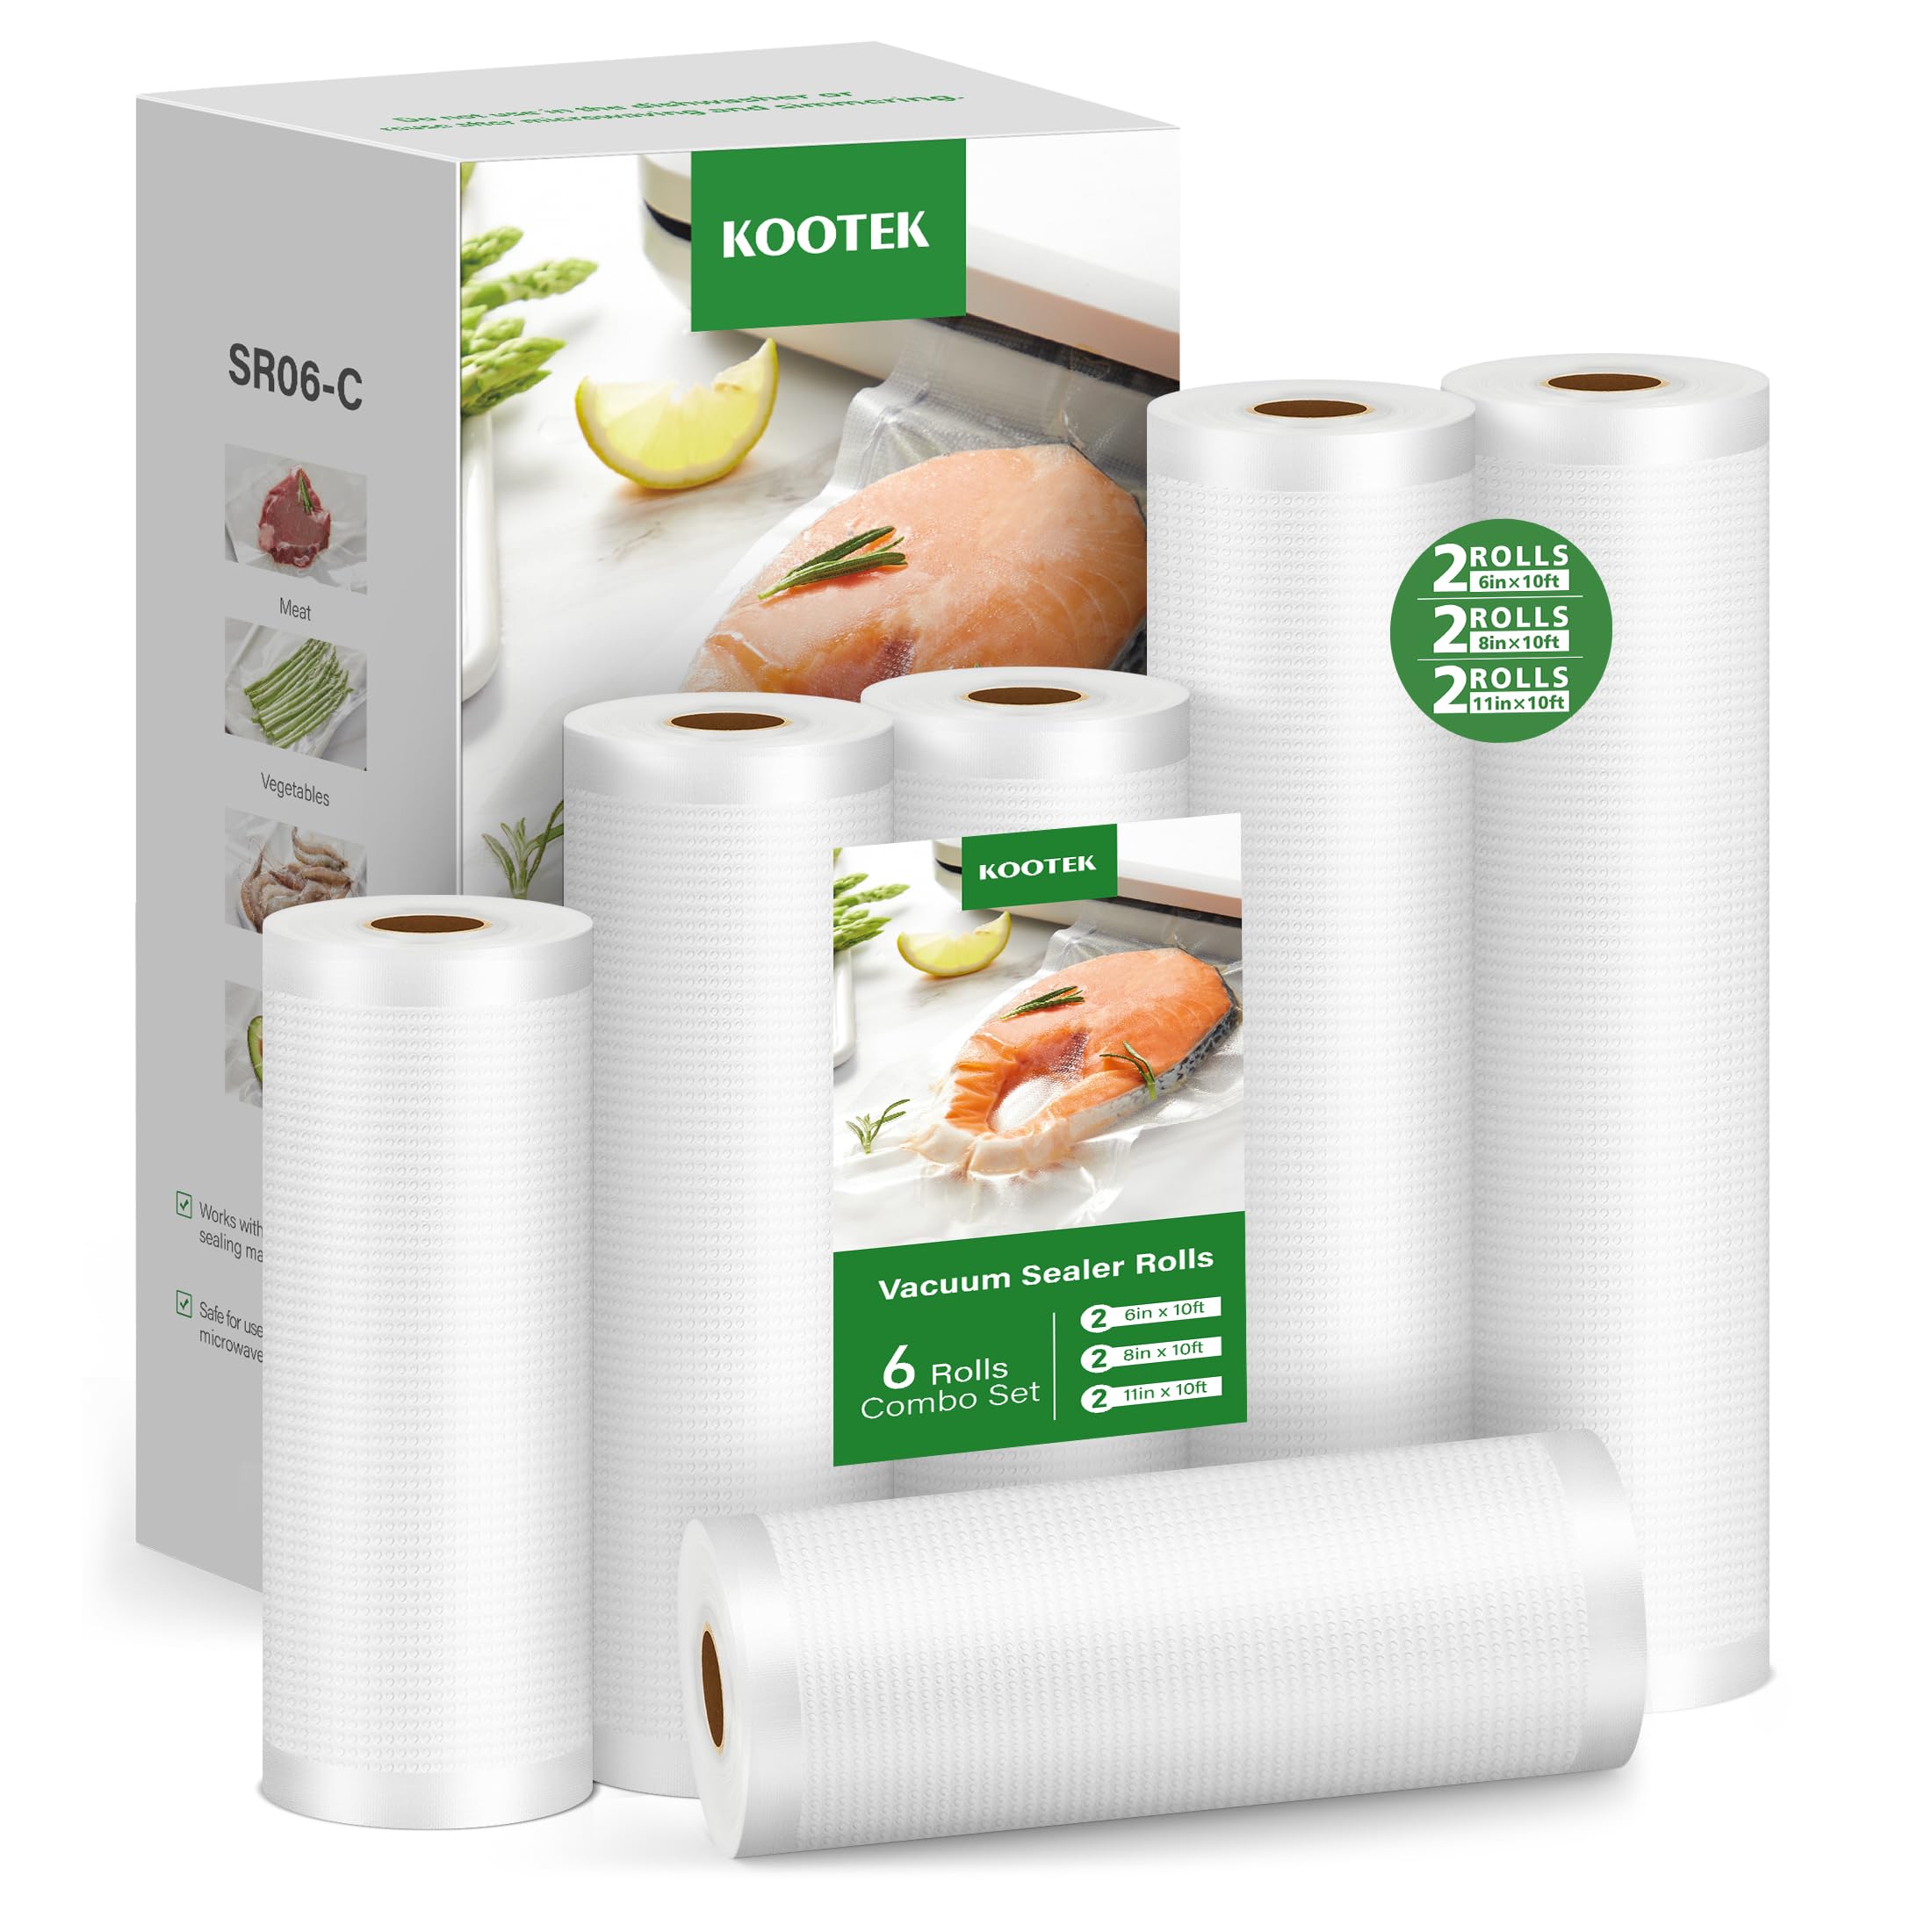 Kootek Vacuum Sealer Bags, 6 Pack 2 Rolls 11"x10' and 2 Rolls 8"x10' and 2 Rolls 6"x10' (Total 60 feet), Commercial Grade, BPA Free Food Vac Bags Rolls for Storage, Meal Prep or Sous Vide